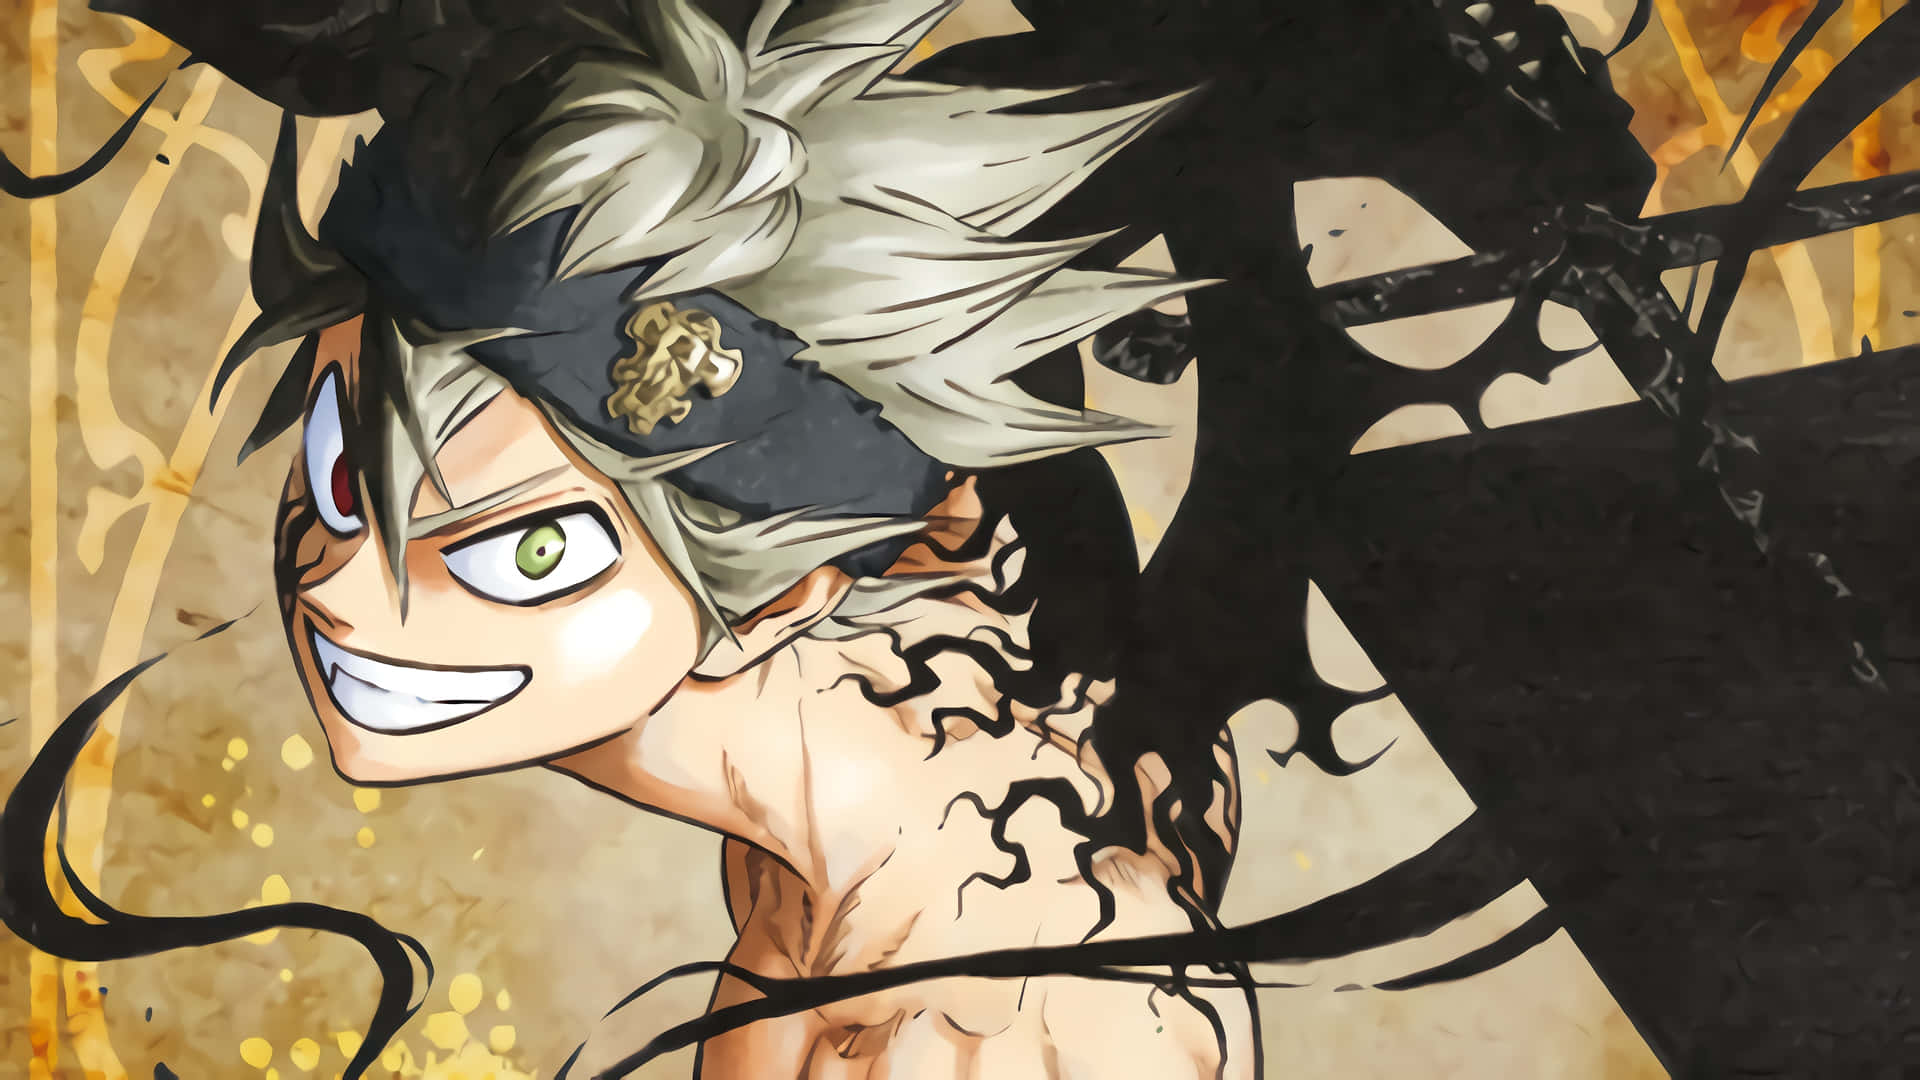 The Magic Knights of Black Clover Anime" Wallpaper